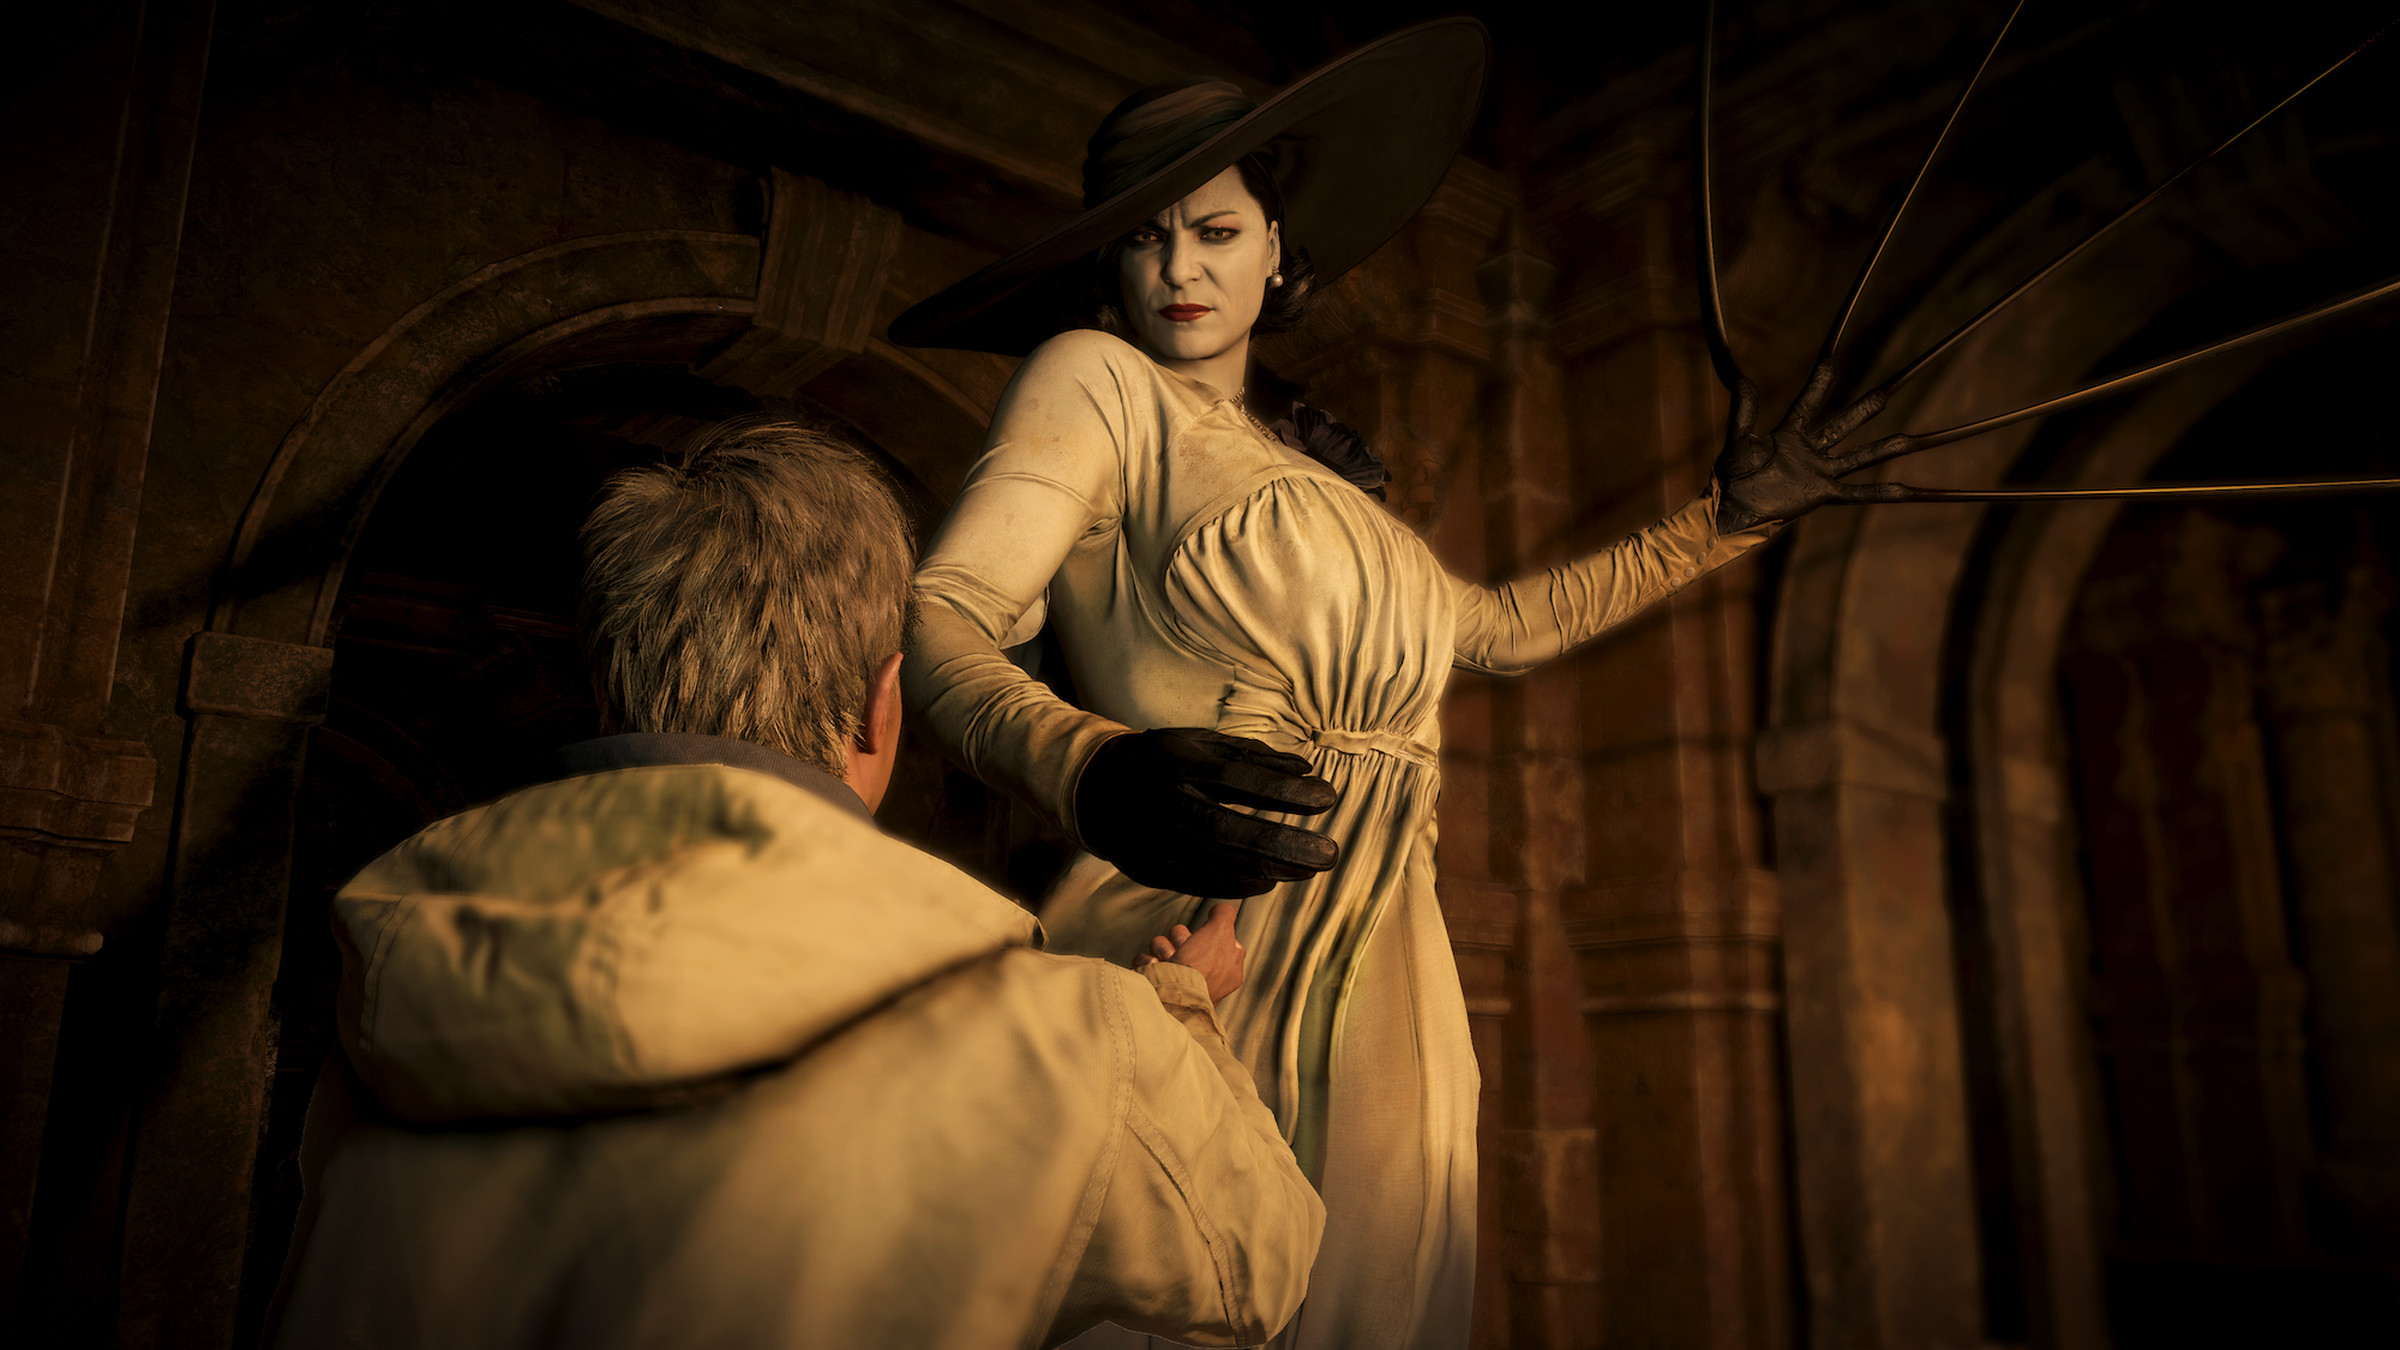 In a screenshot from Resident Evil Village, protagonist Ethan Winters pleads in front of Lady Dimitrescu.